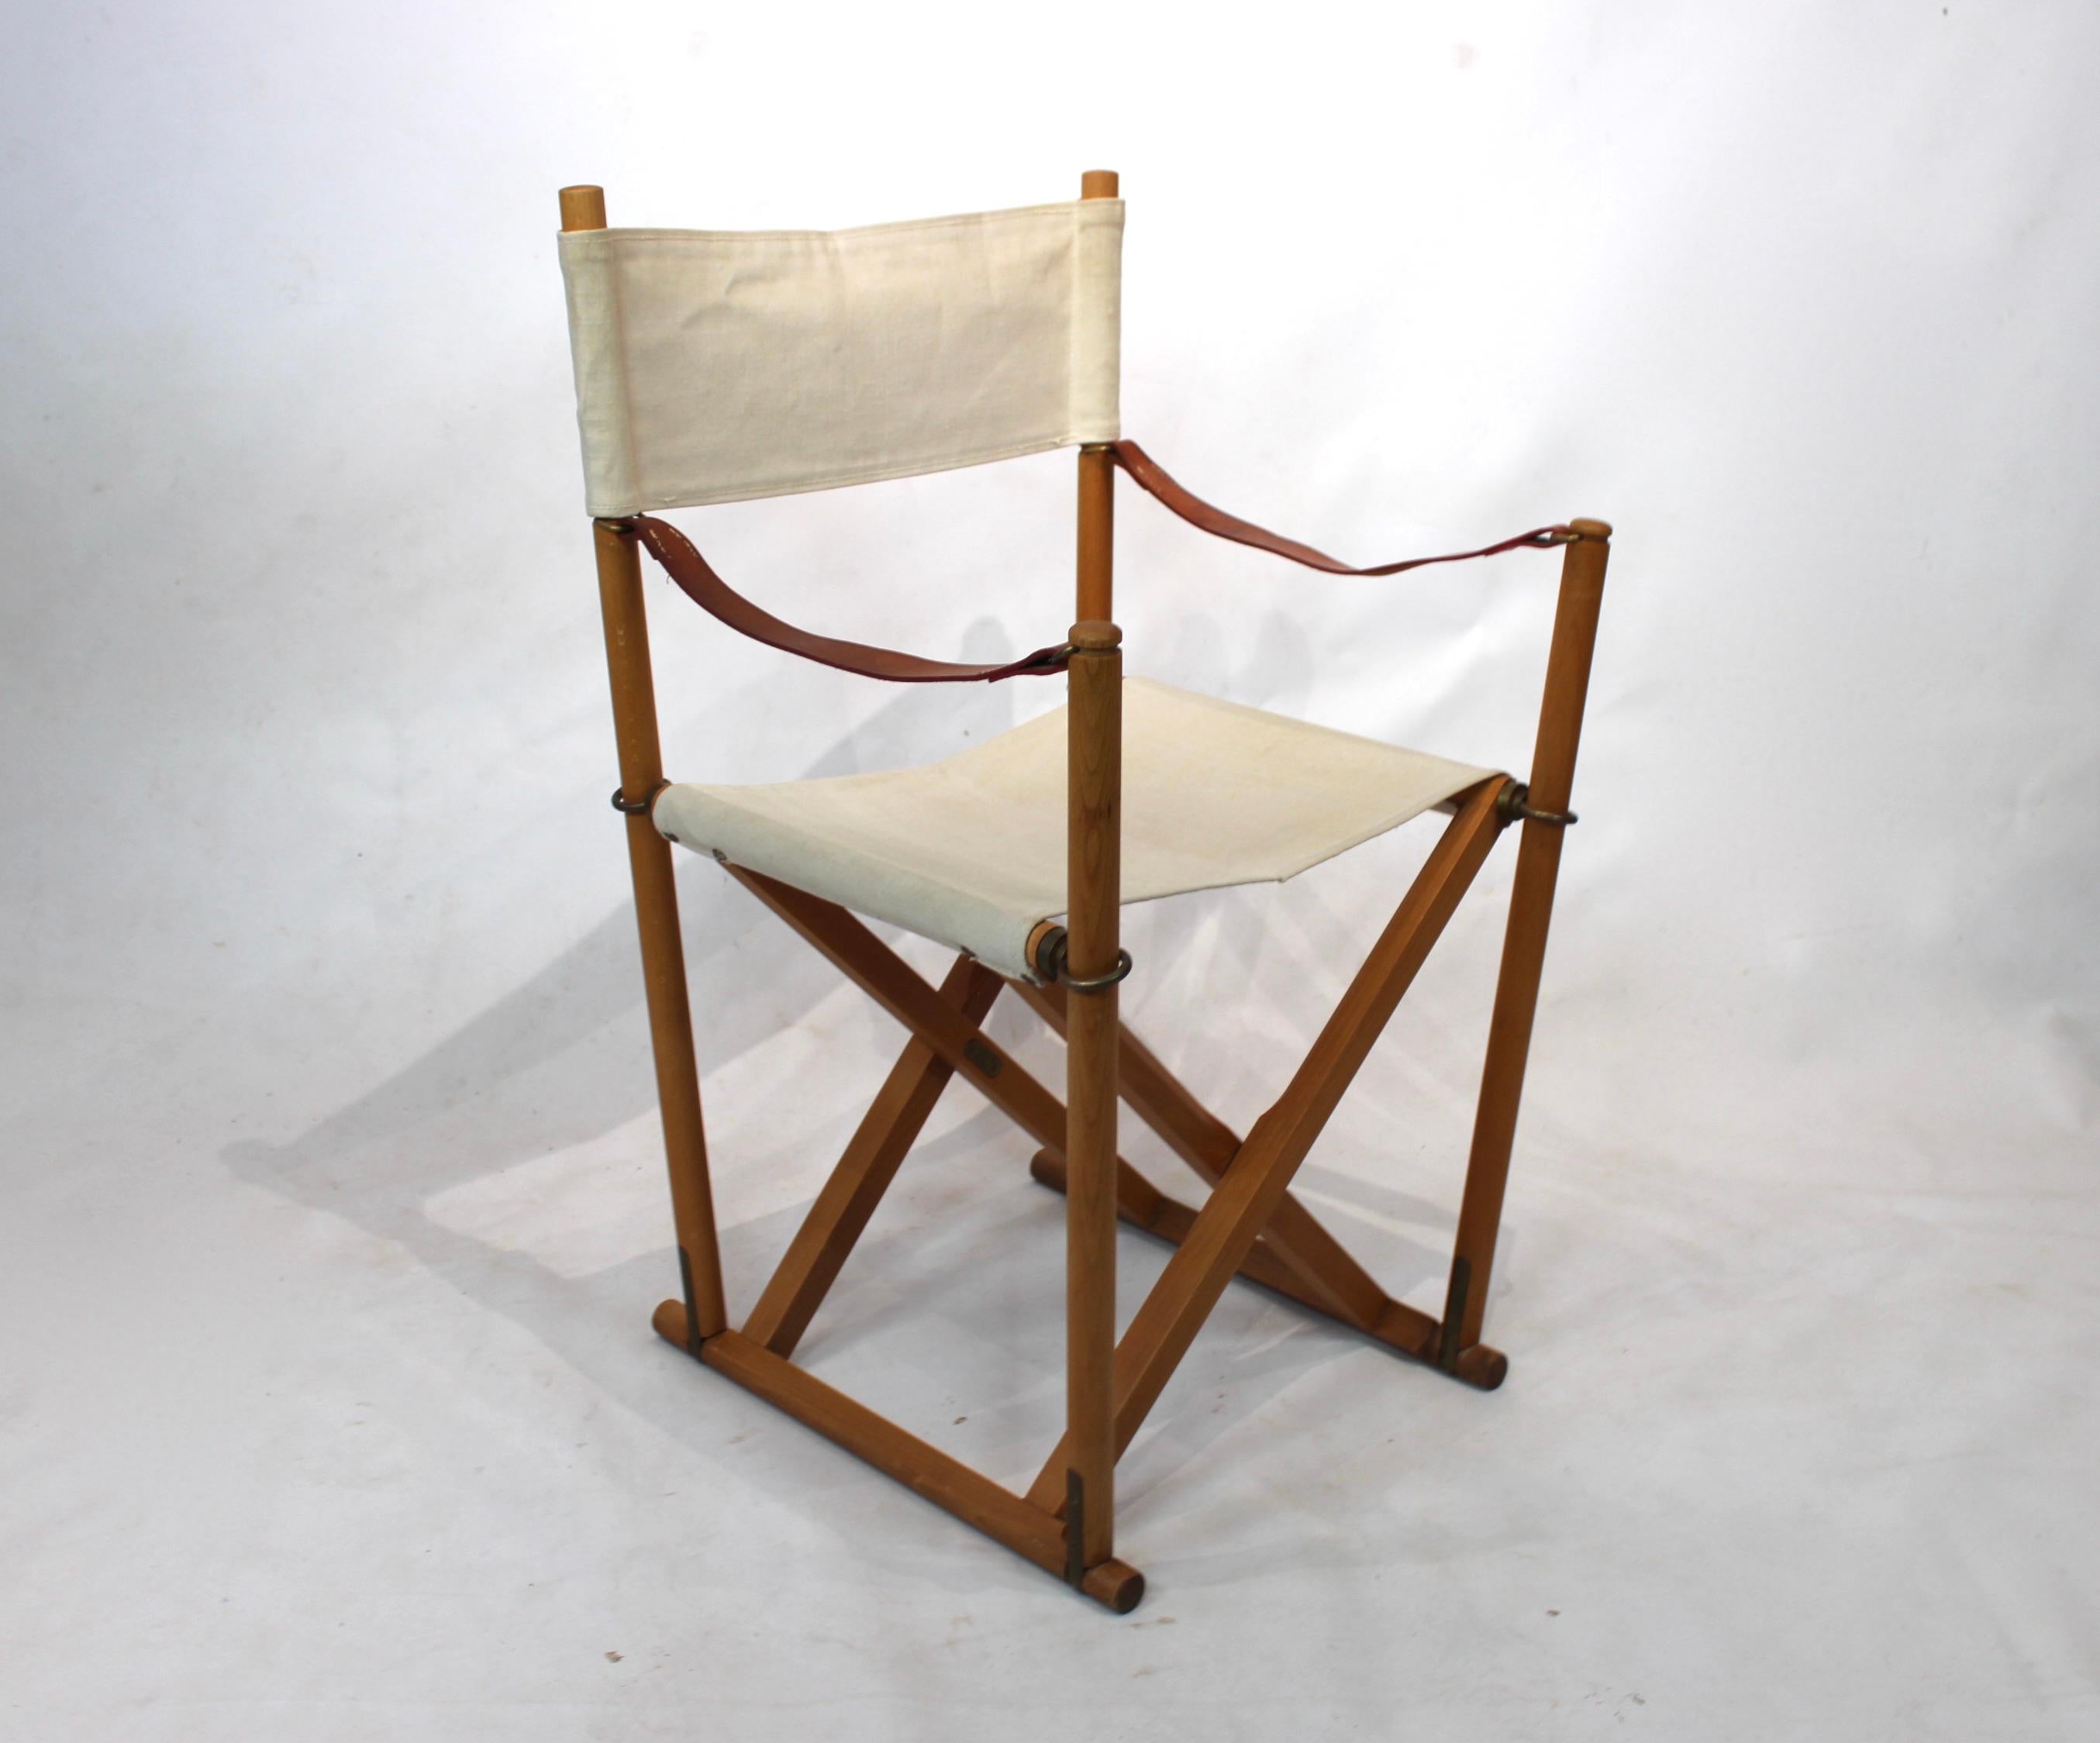 Set of four folding chairs, model MK99200, designed by Mogens Koch. The chairs are of beech and light nature canvas.